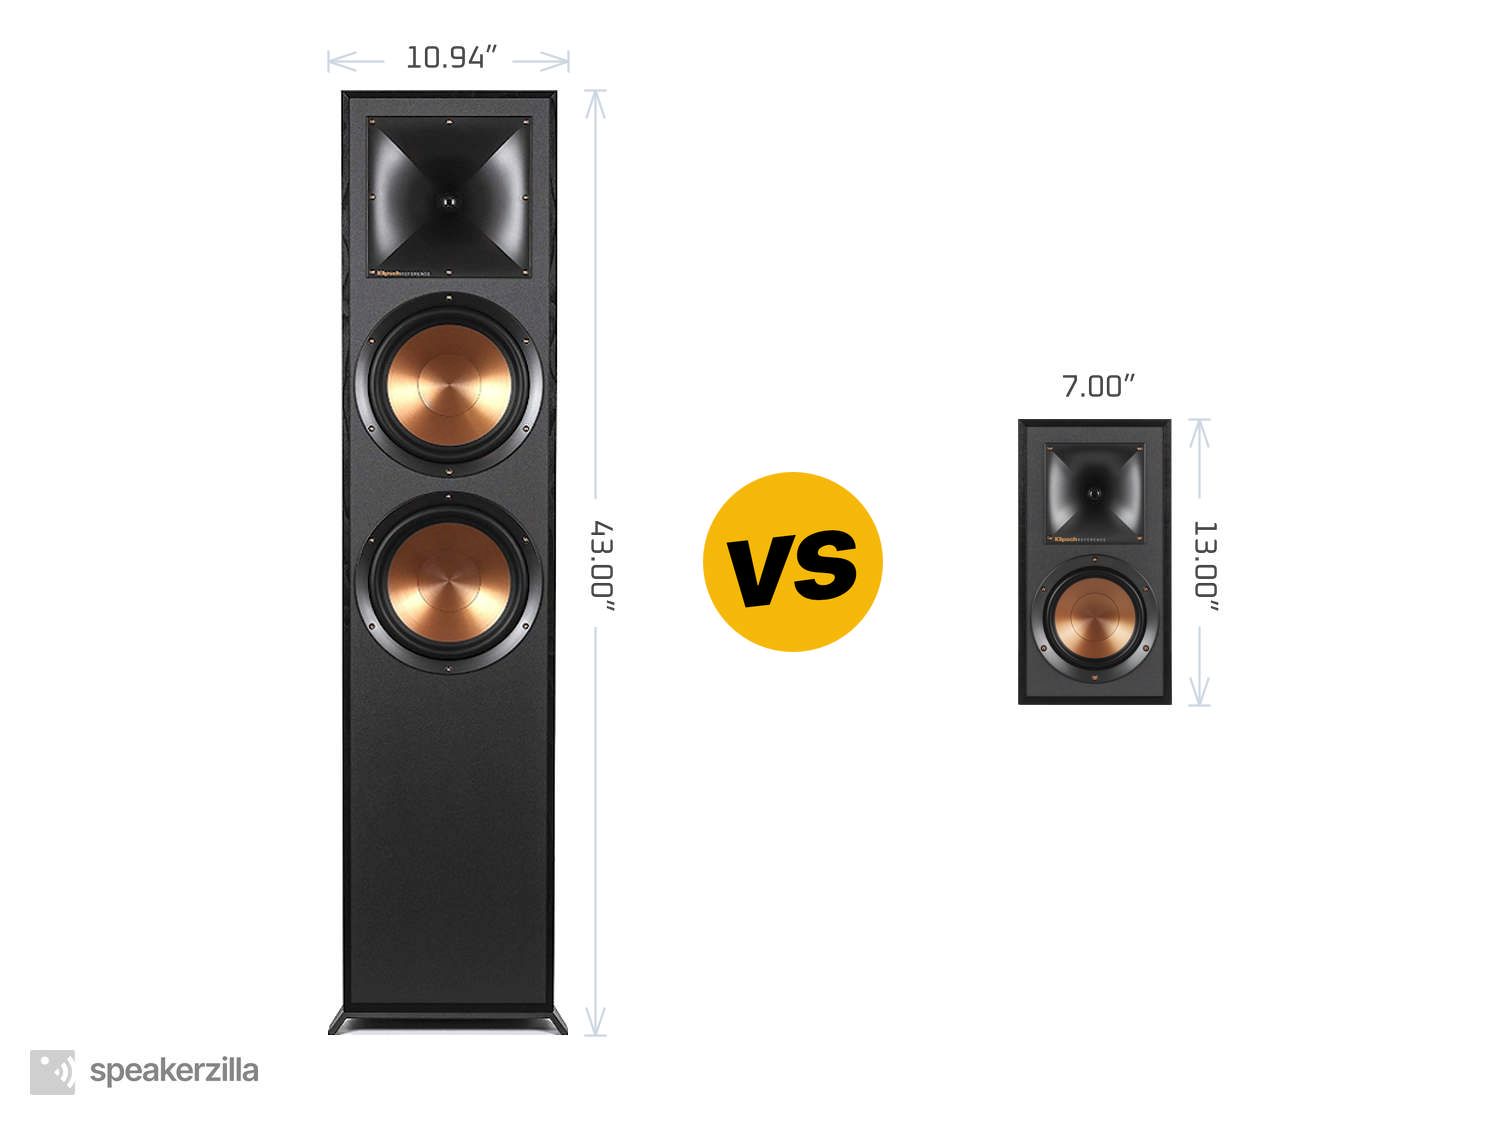 Klipsch Reference R-820F Tower Speakers vs. Klipsch Reference R-51M Bookshelf Speakers